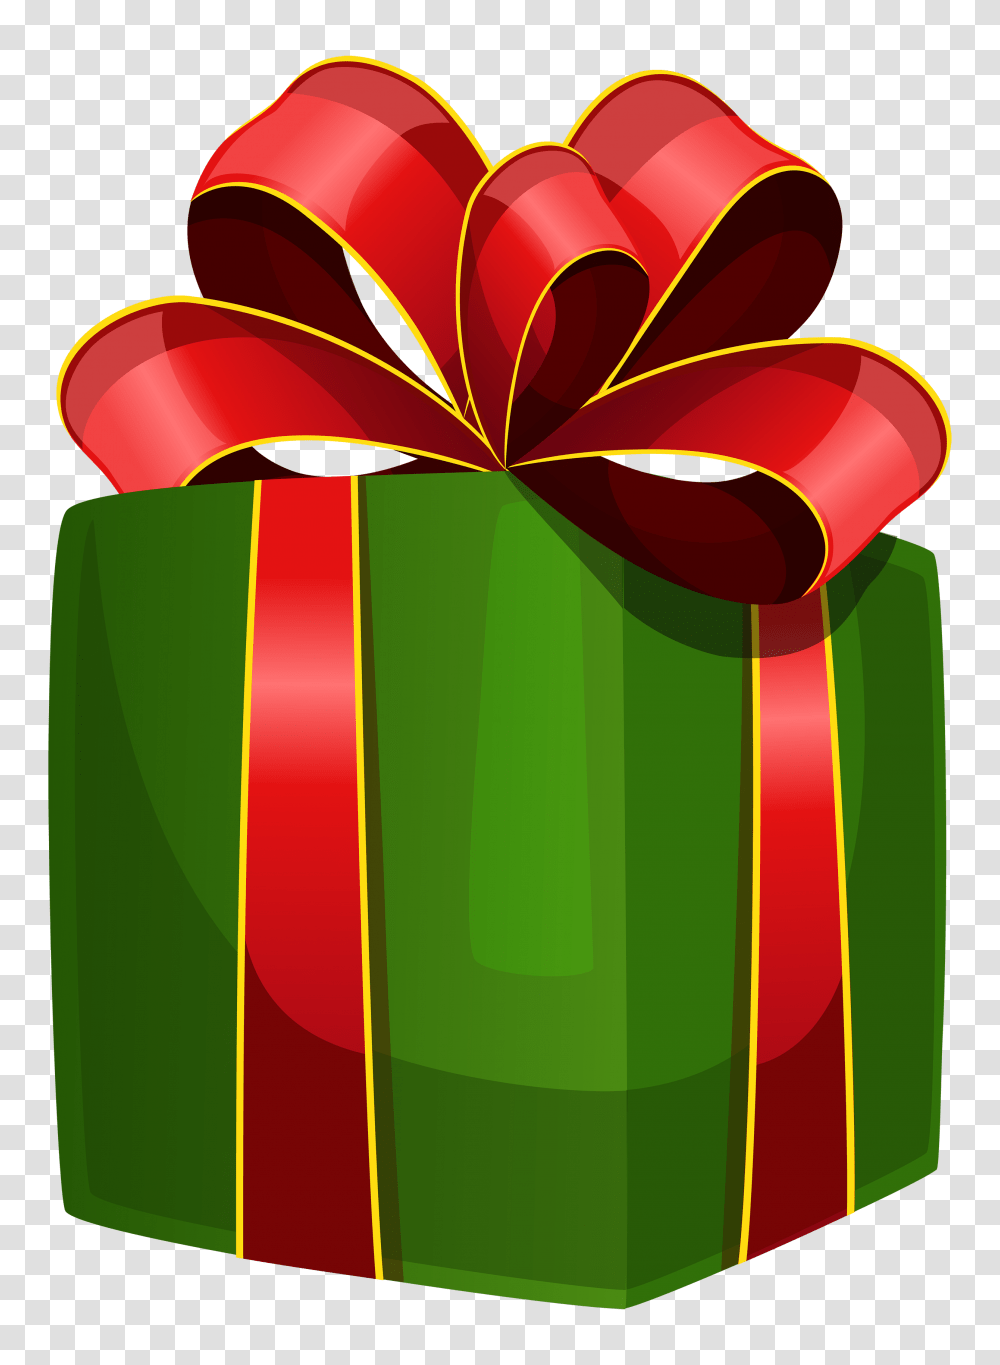 Green Gift Box Clipart Transparent Png